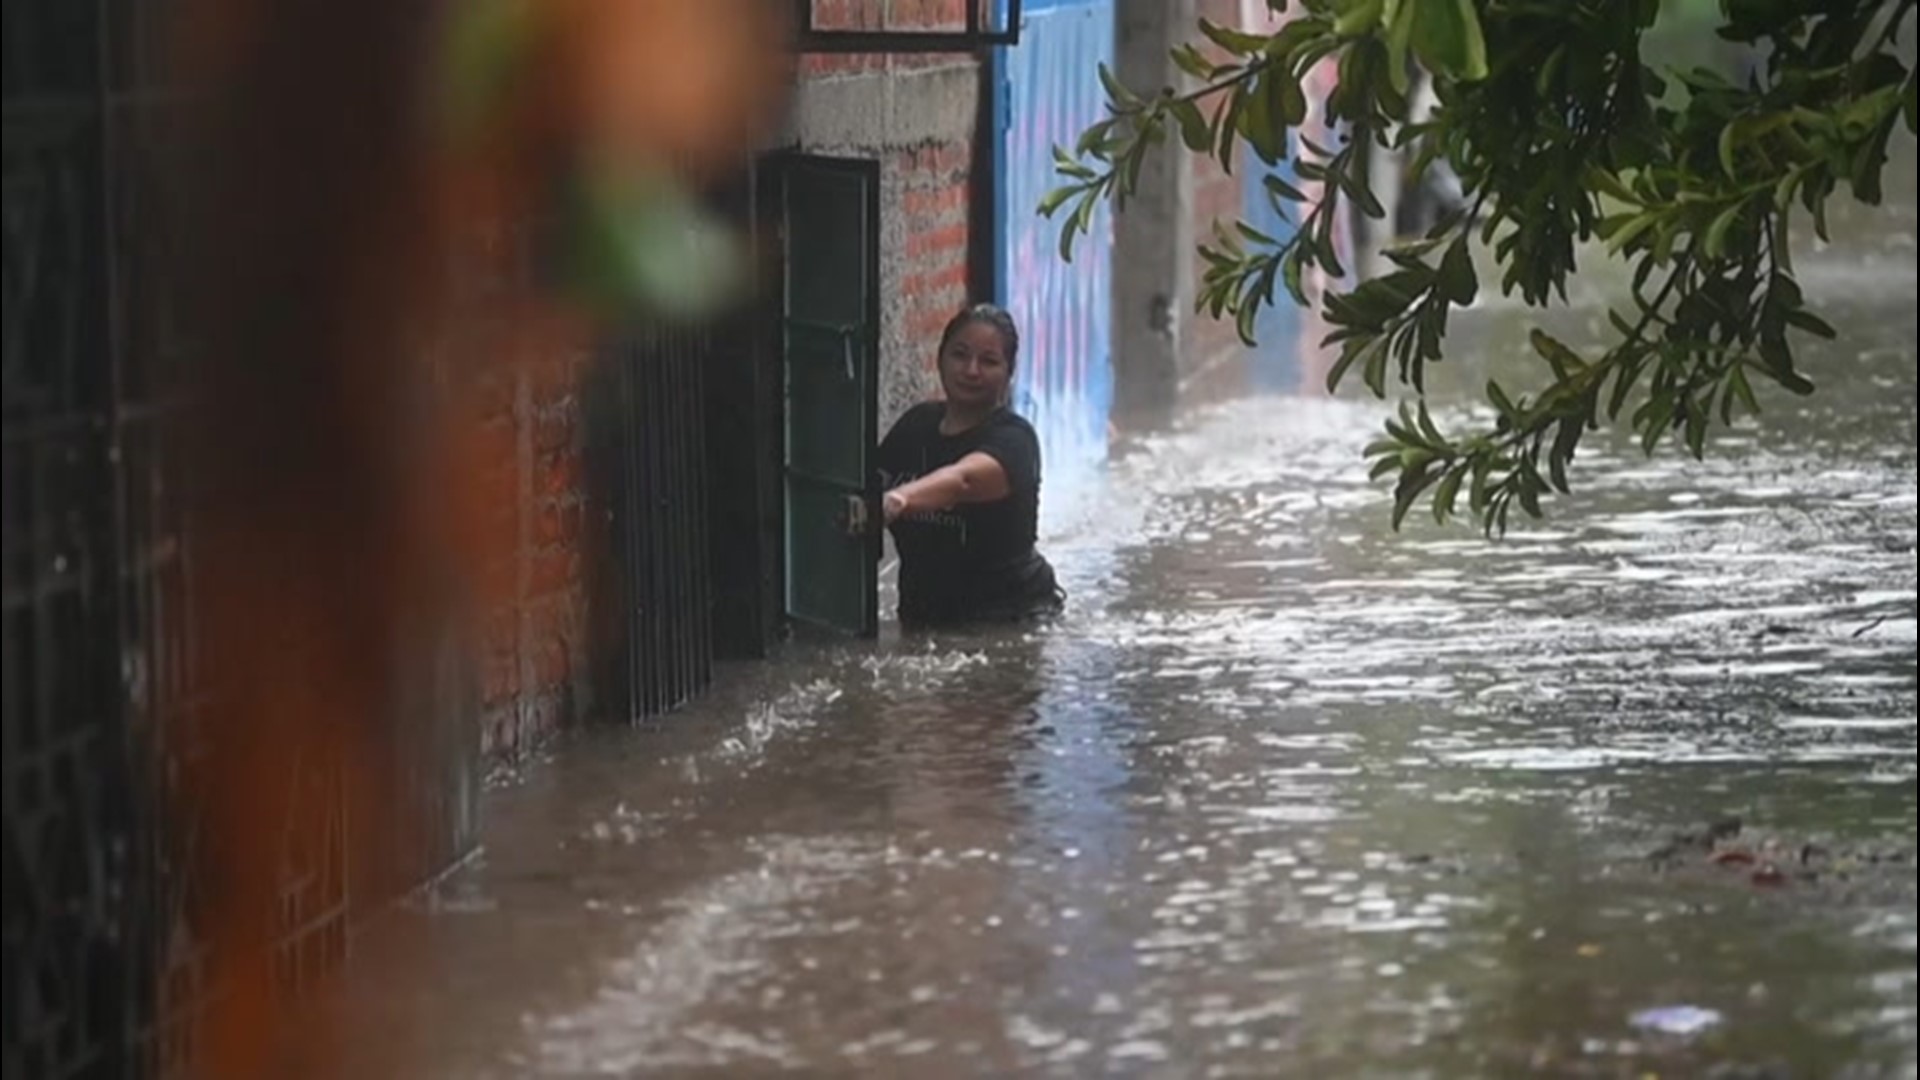 Nine people were killed as Tropical Storm Amanda battered El Salvador. Residents evacuated their homes as the storm flooded neighborhoods and destroyed homes.